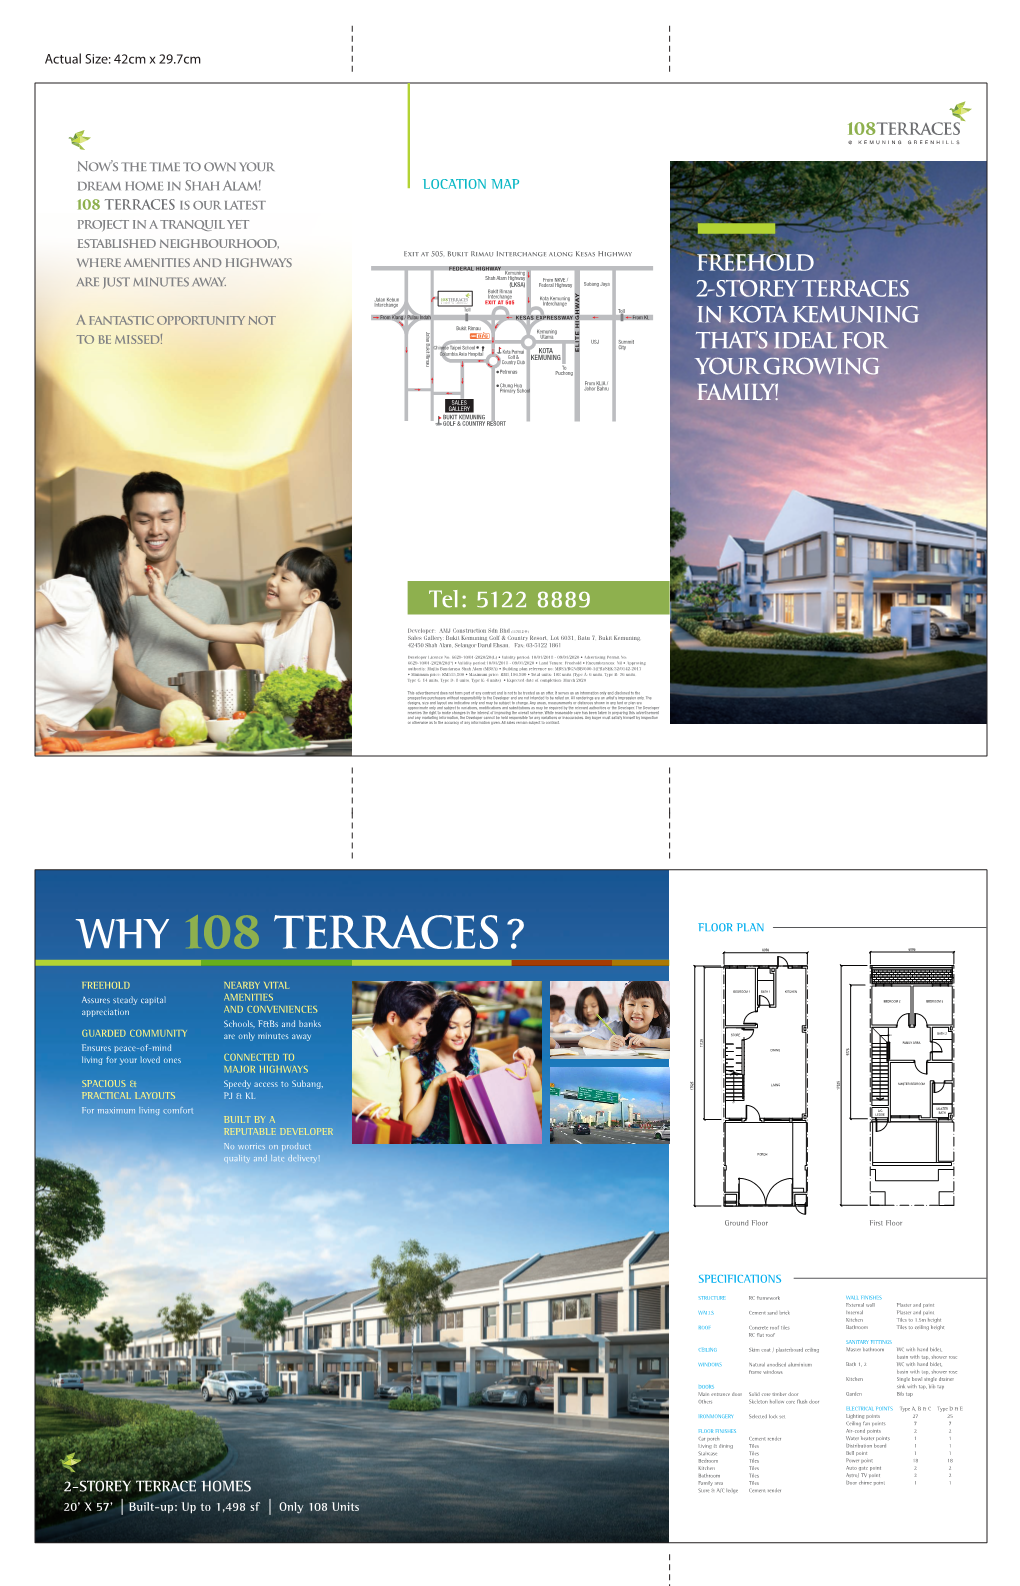 Why 108 Terraces? 6096 6096